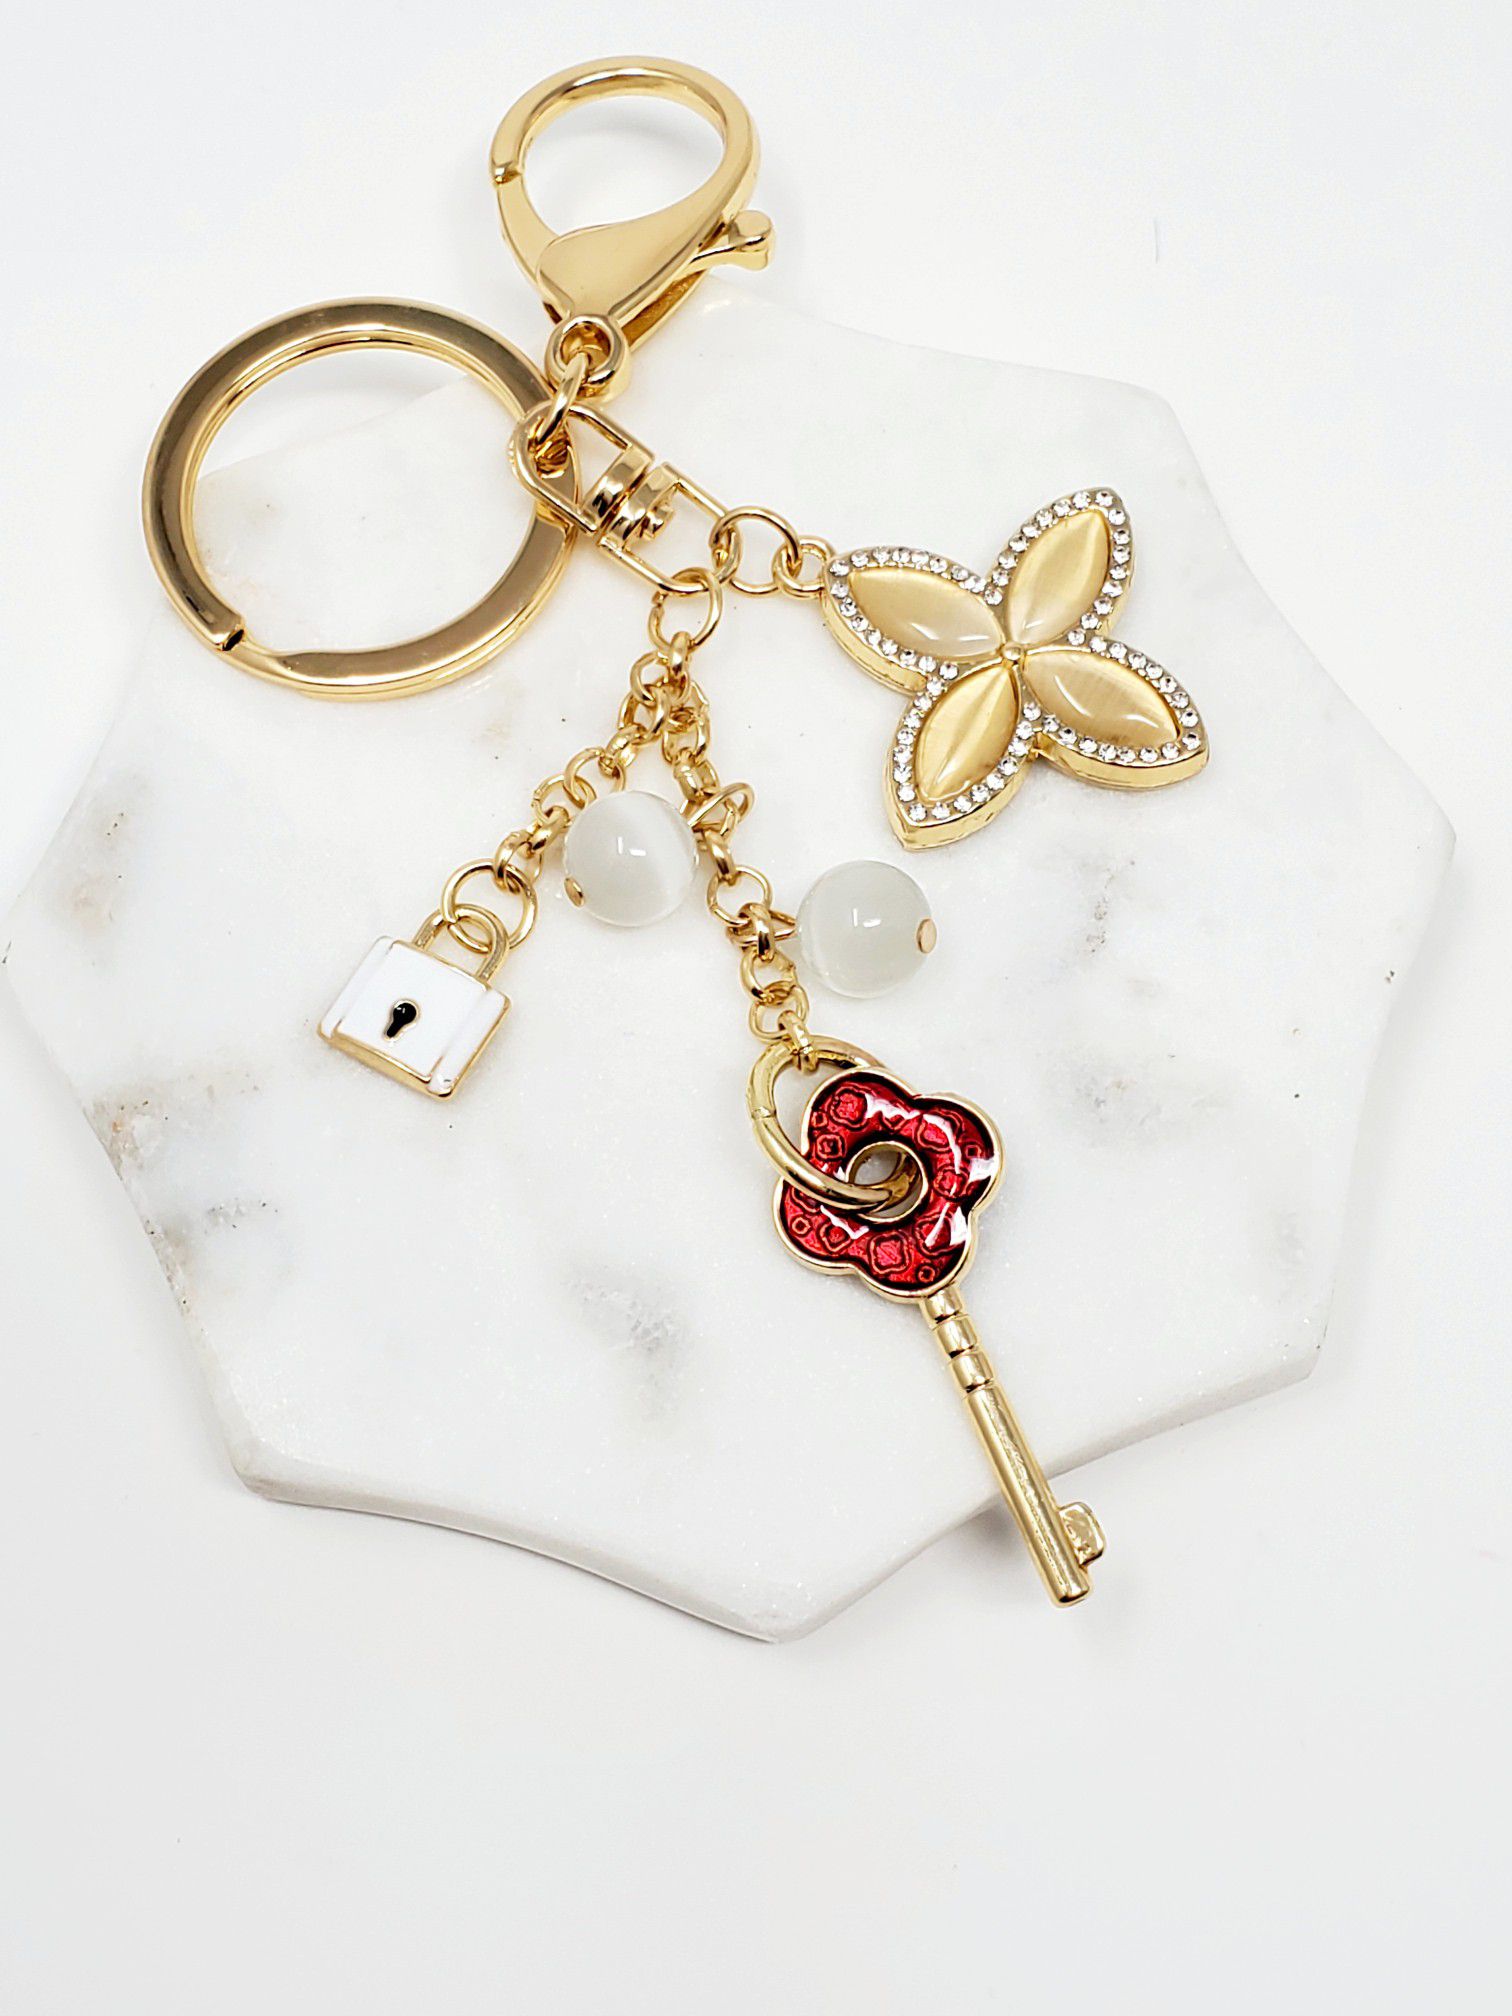 Bling keychain bagcharm with red key and white lock